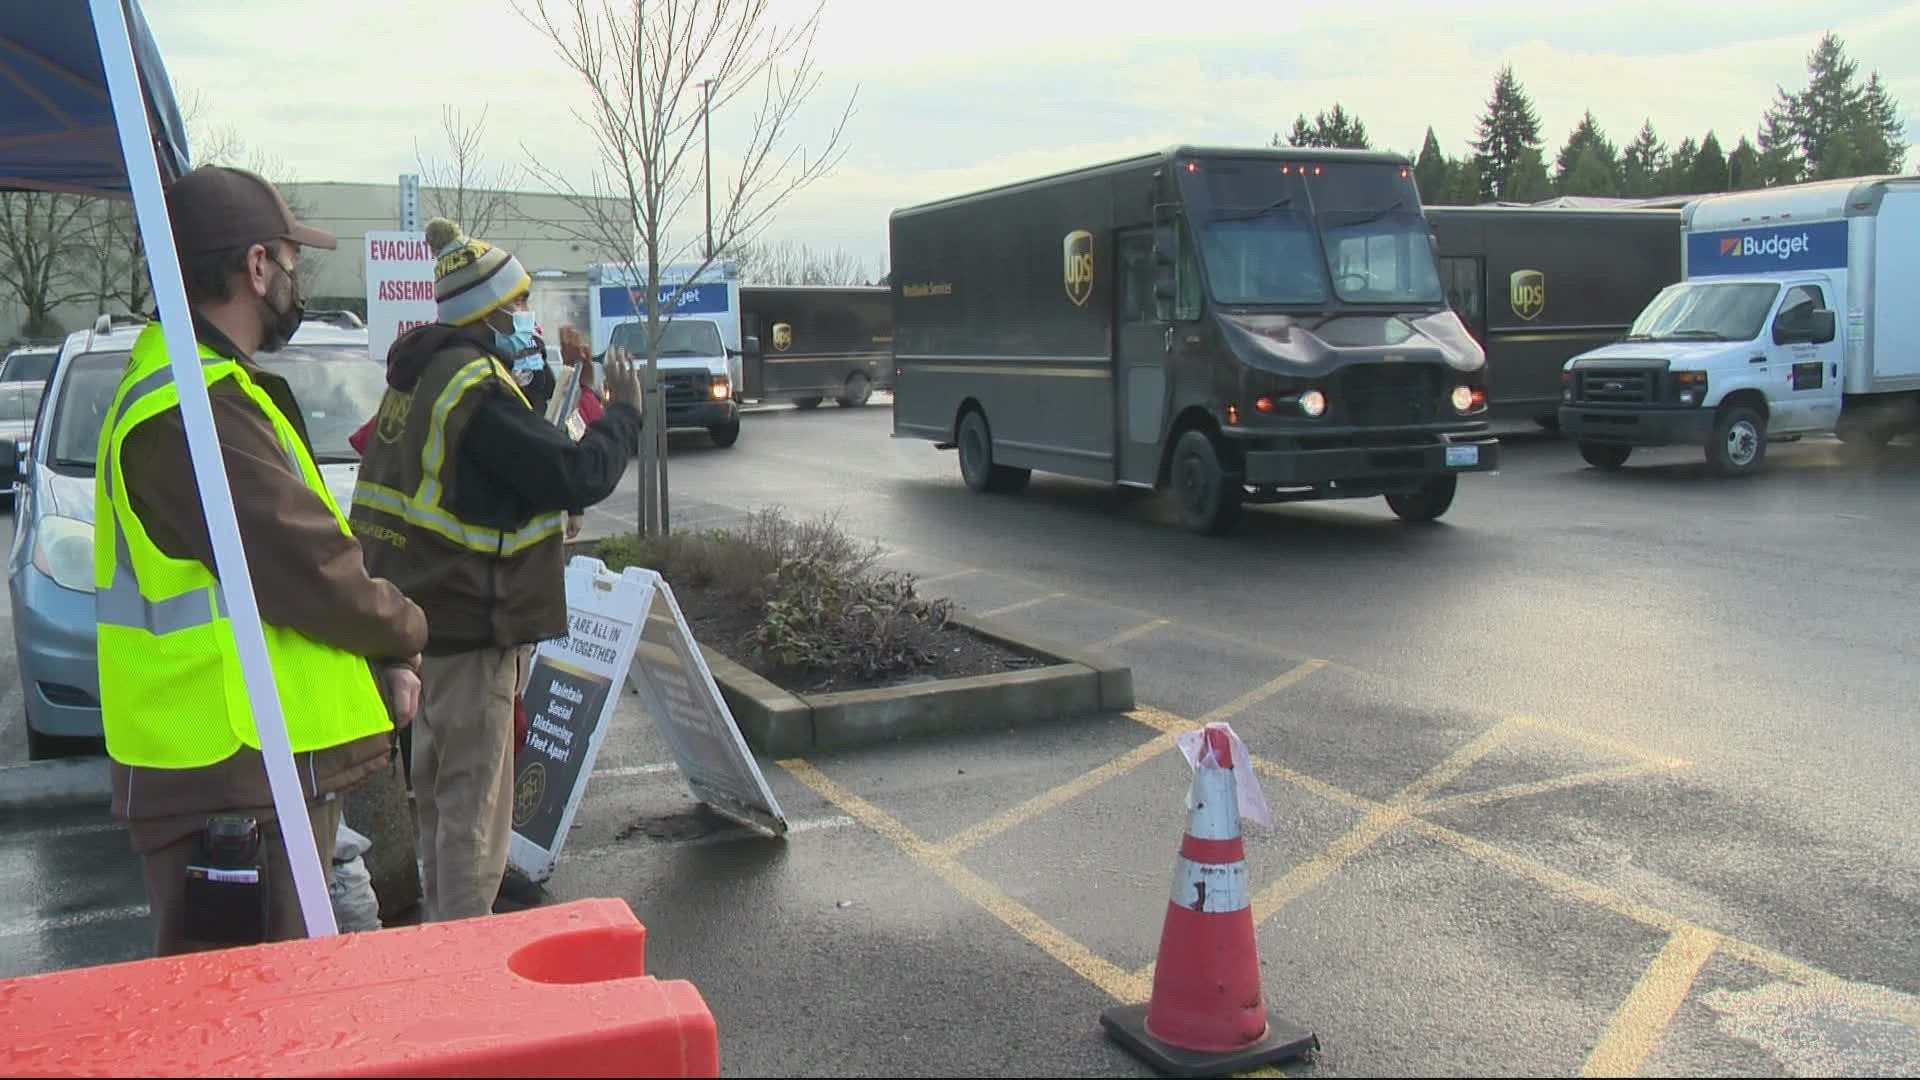 Sanjeeta Pretap visits a Vancouver UPS center several times a week because the deliver trucks brighten her son's day. On Dec. 23, he got a special surprise.